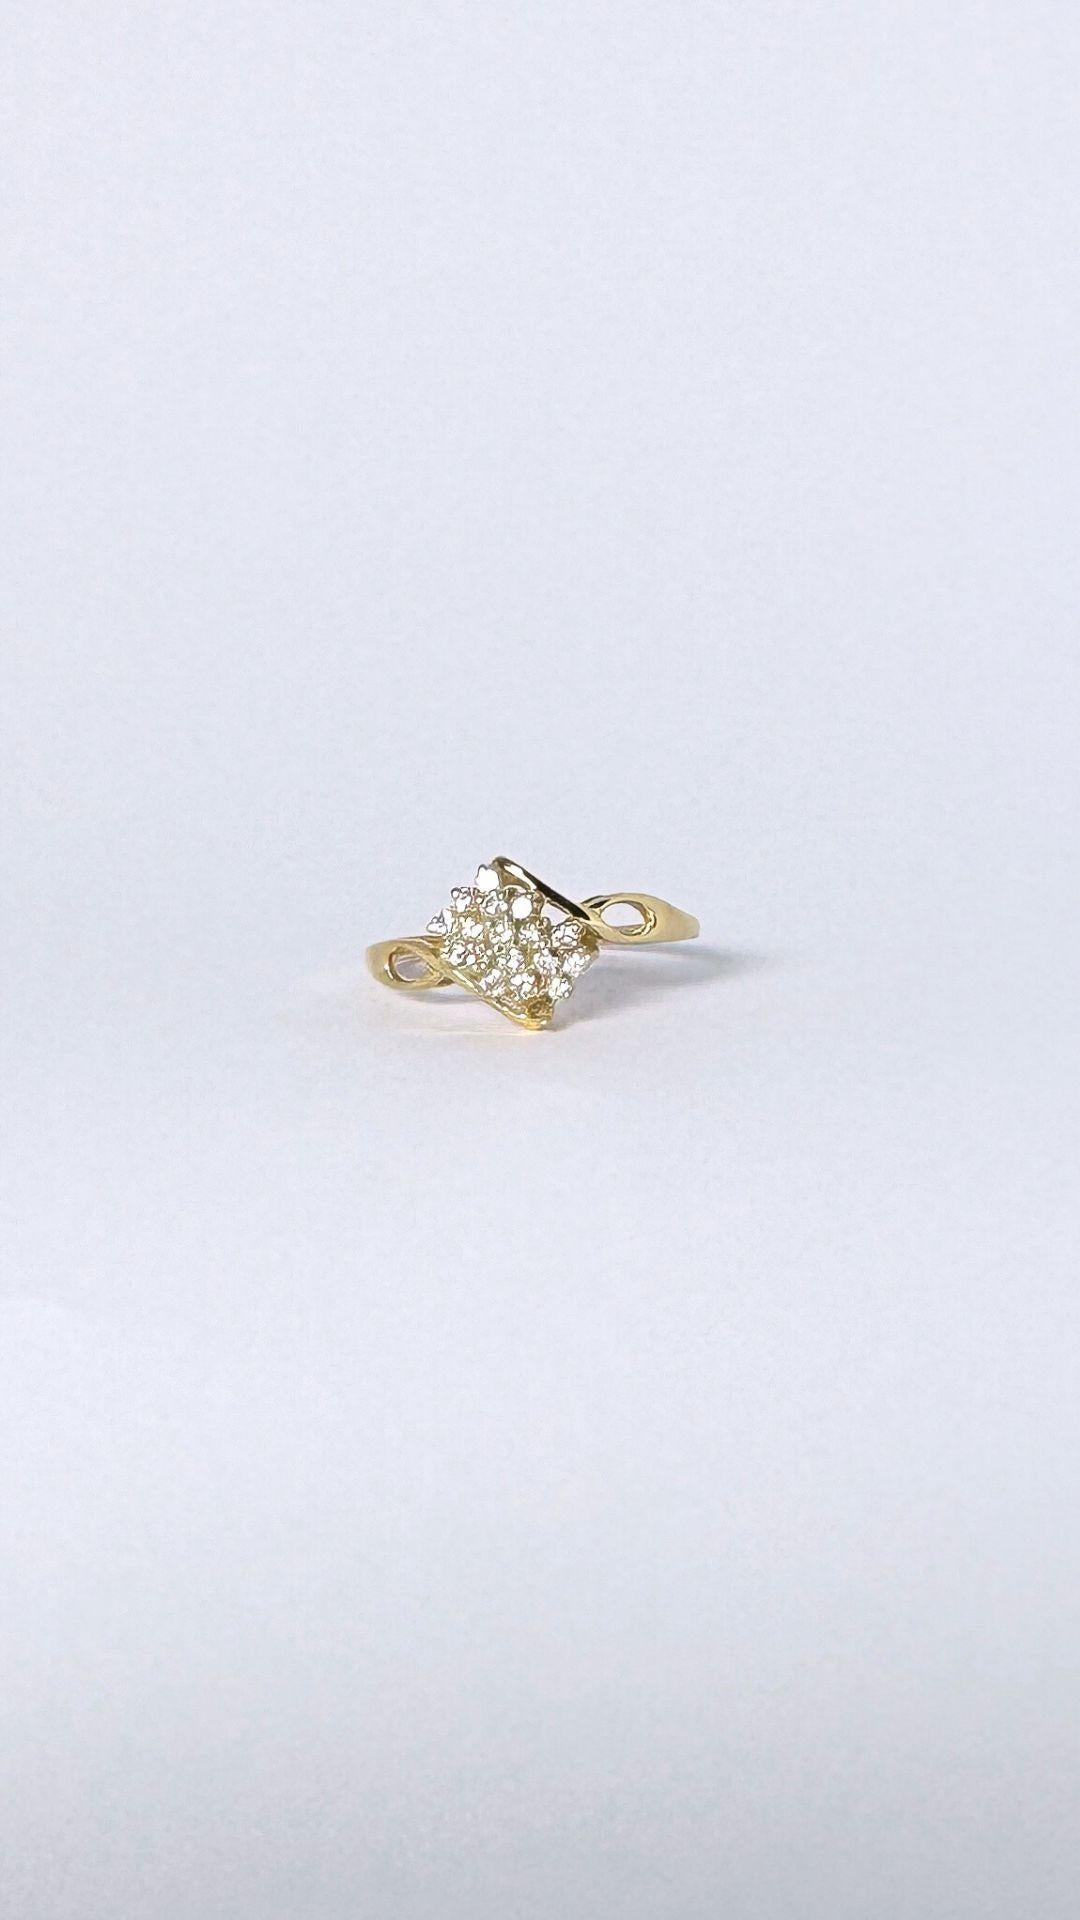 Look at the design and the elegance of this jewel set with brilliant cut diamonds. This ring is made of 18 carat  yellow gold and holds 17 brilliant cut diamonds VVSI of about 0.12. The details of this pre-loved jewel is both charming as for sure